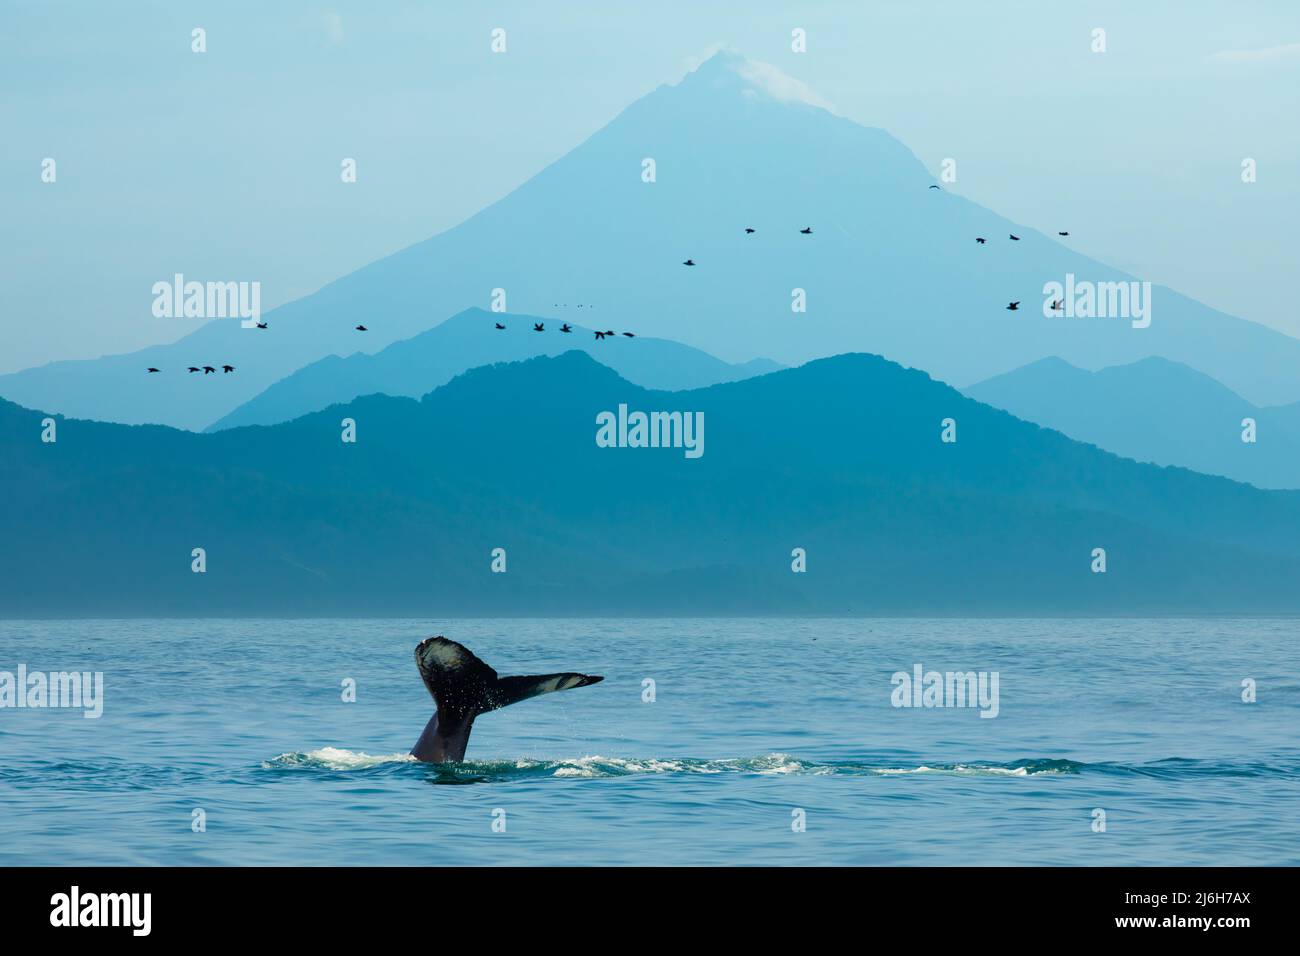 Whale flukes in blue mountains and sea of Kamchatka, Russia Stock Photo